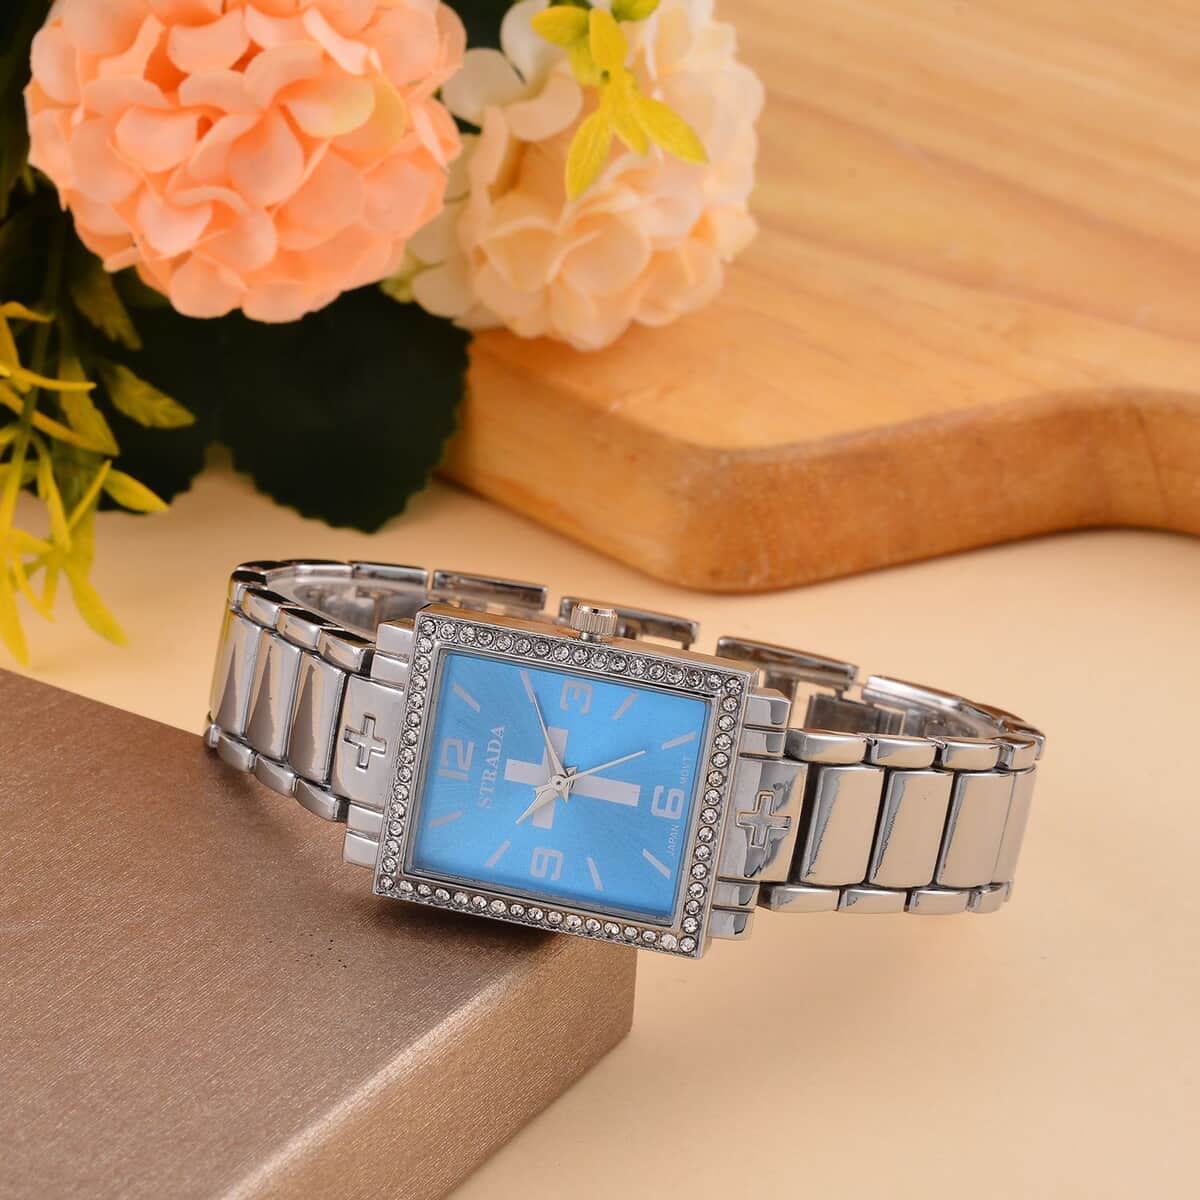 Strada White Austrian Crystal Japanese Movement Cross Pattern & Blue Dial Watch with Silvertone Strap (26.16-30.48 mm) (6.75-8.25 Inches) image number 1